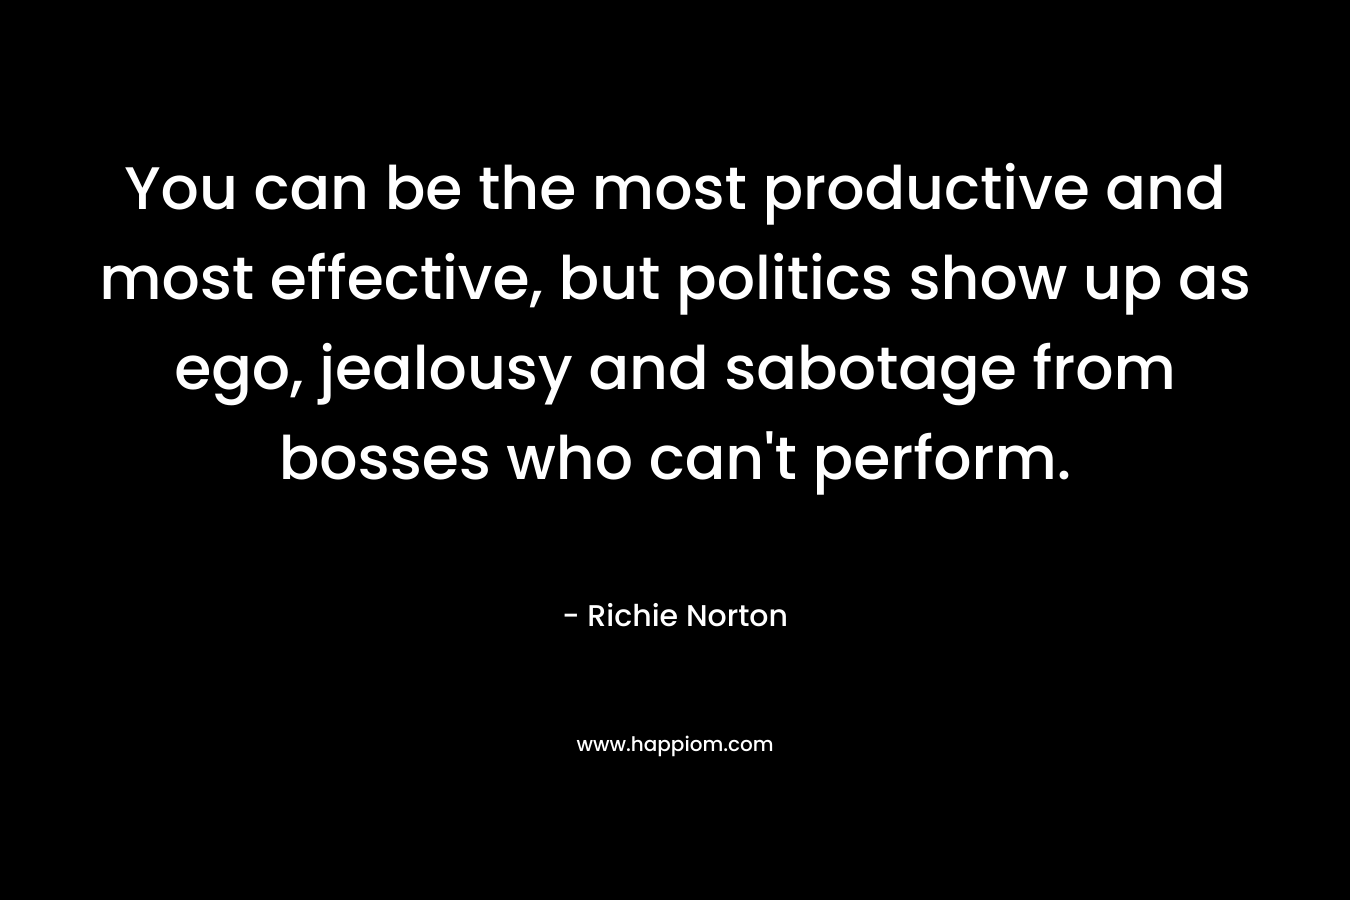 You can be the most productive and most effective, but politics show up as ego, jealousy and sabotage from bosses who can't perform.